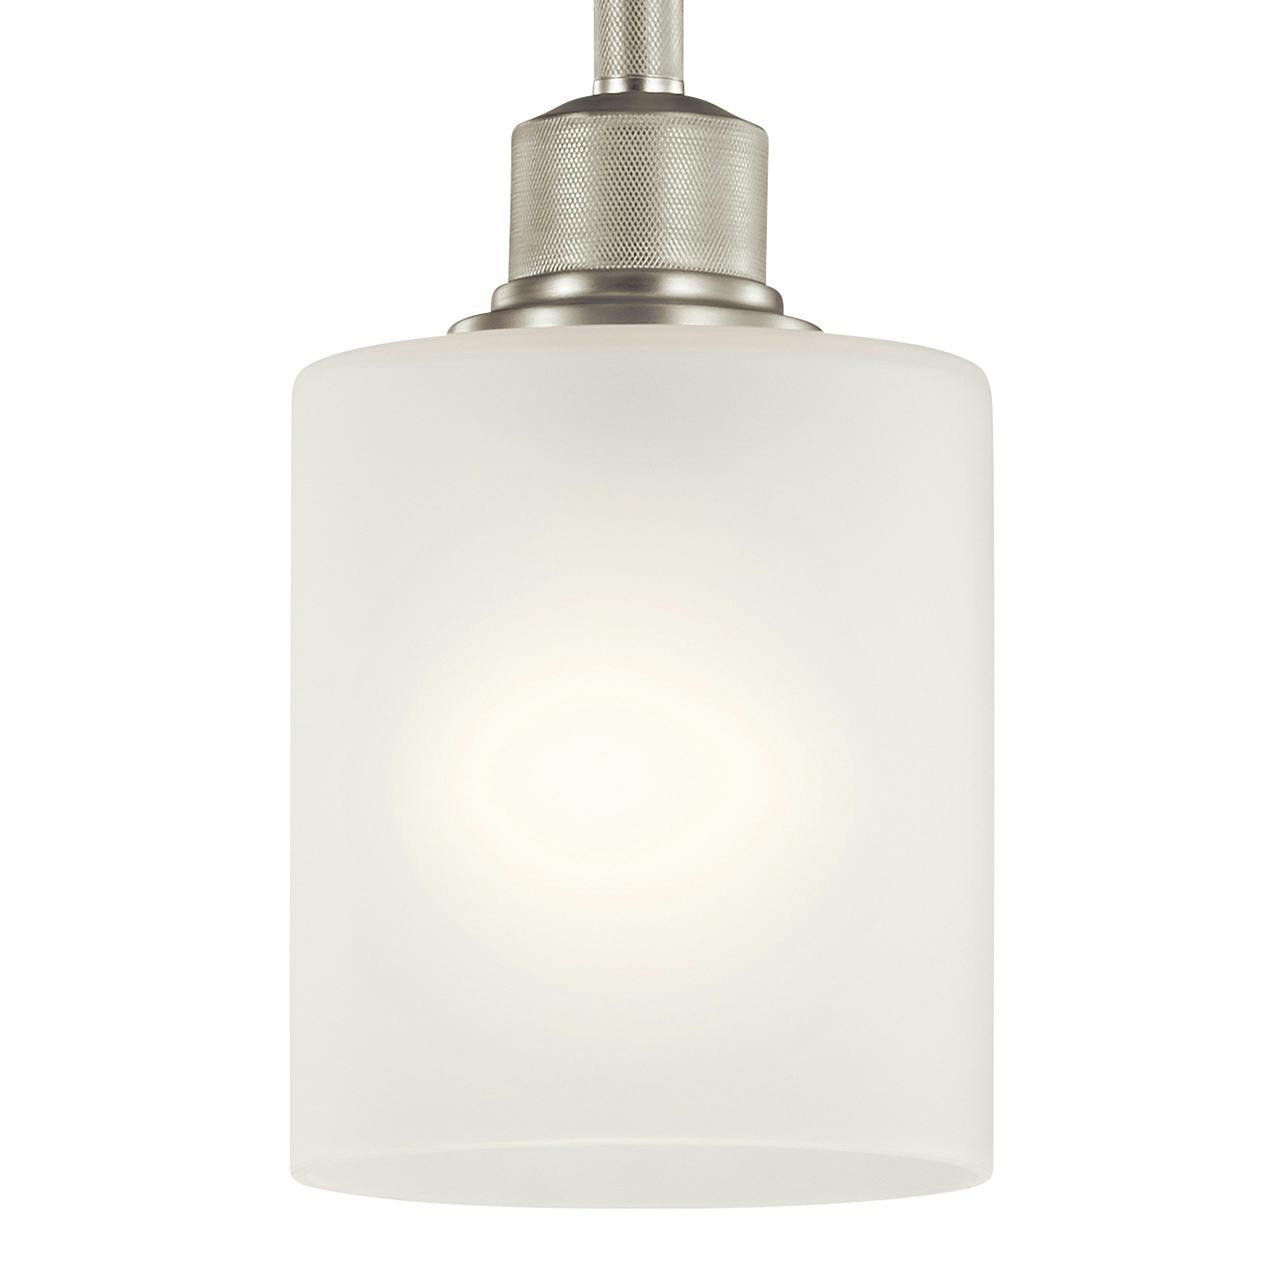 Close up view of the Lynn Haven 1 Light Mini Pendant Nickel on a white background